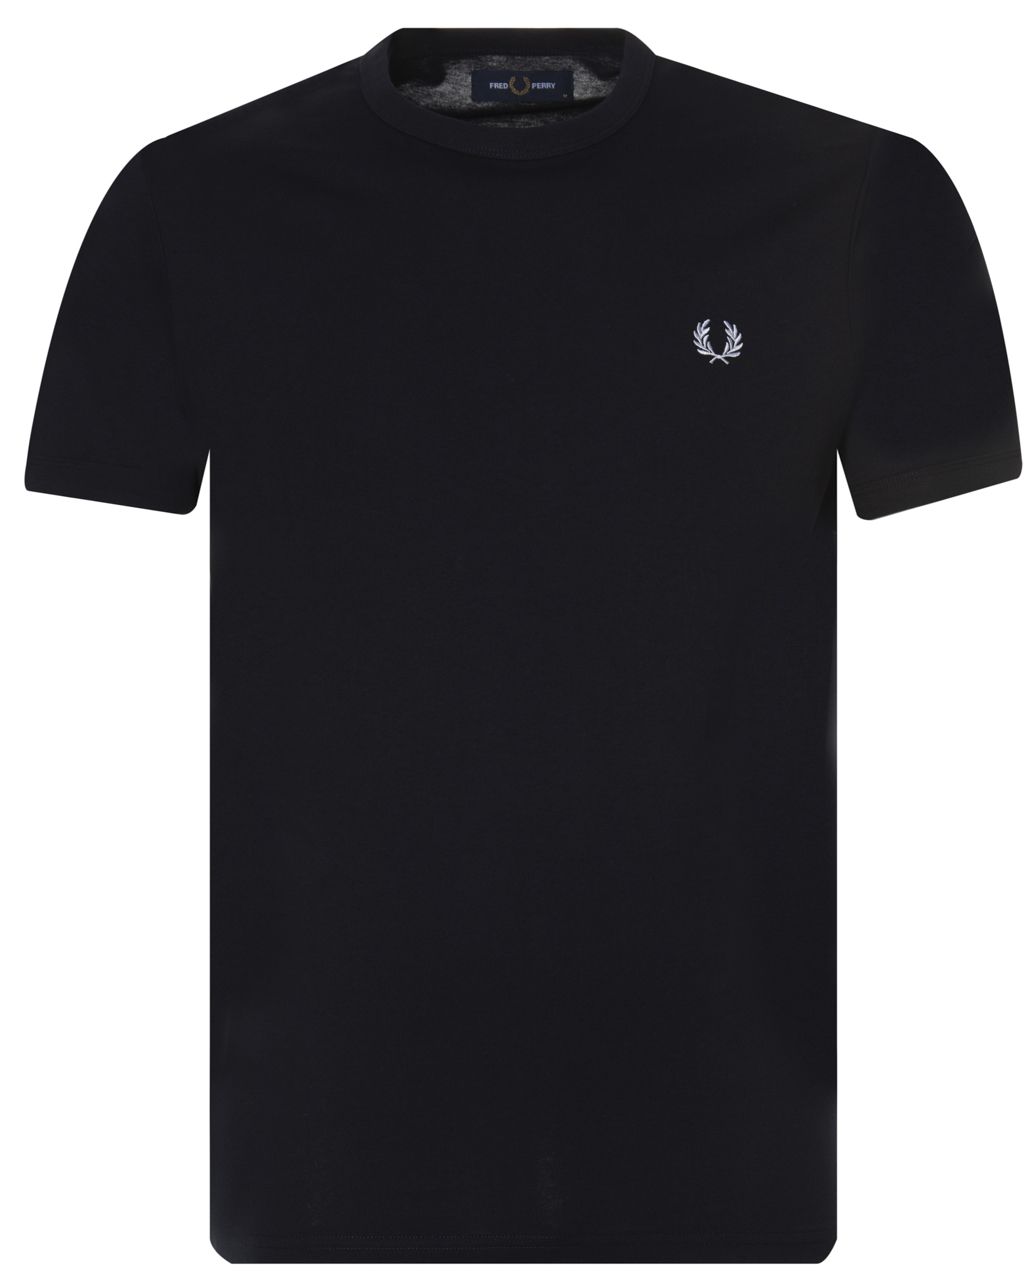 Fred Perry T-shirt KM Blauw 066652-001-L